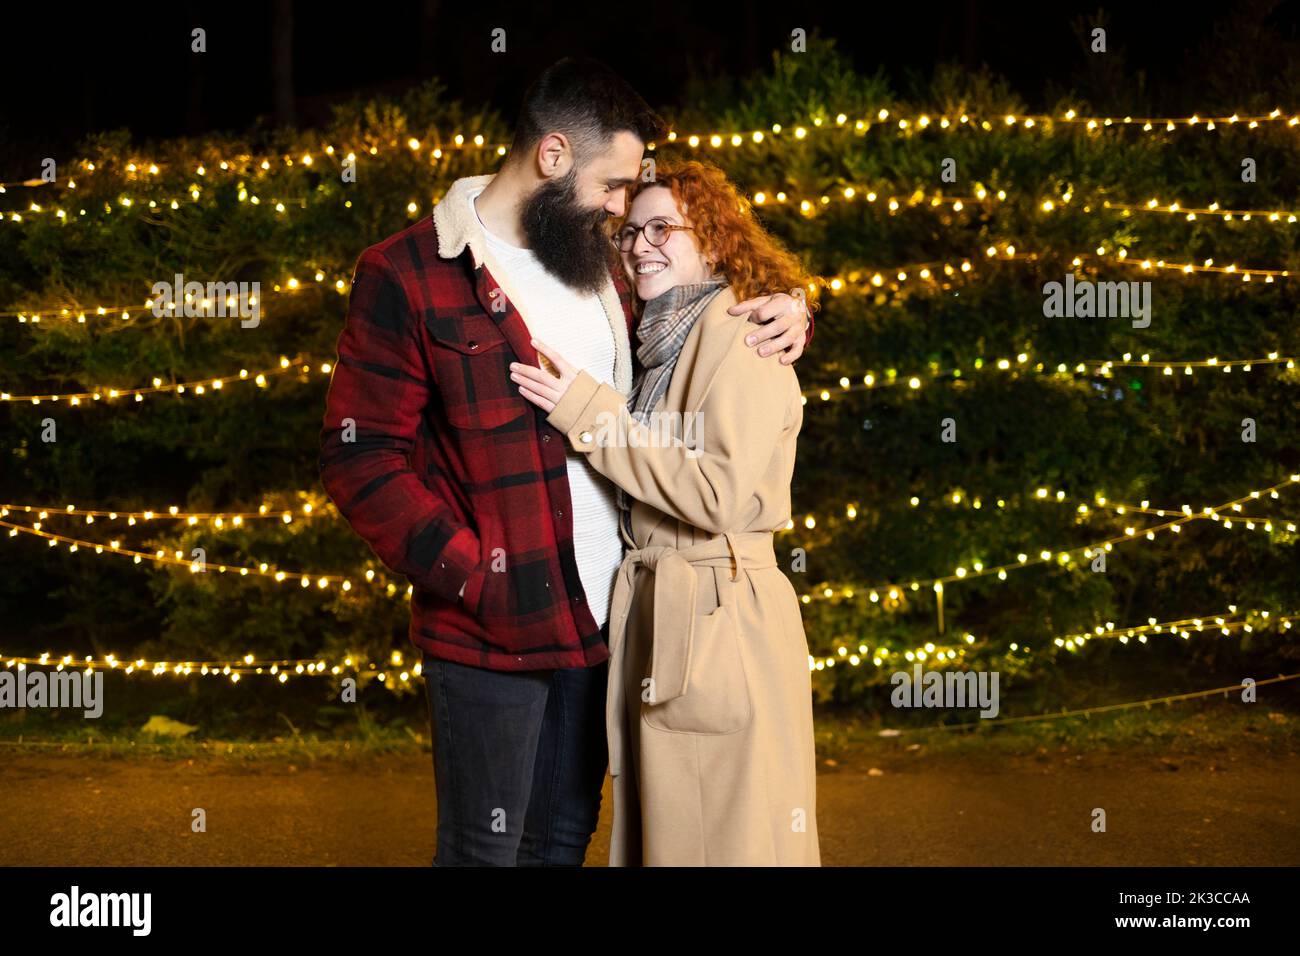 A man holding his female partner in arms during Christmas and winter time Stock Photo